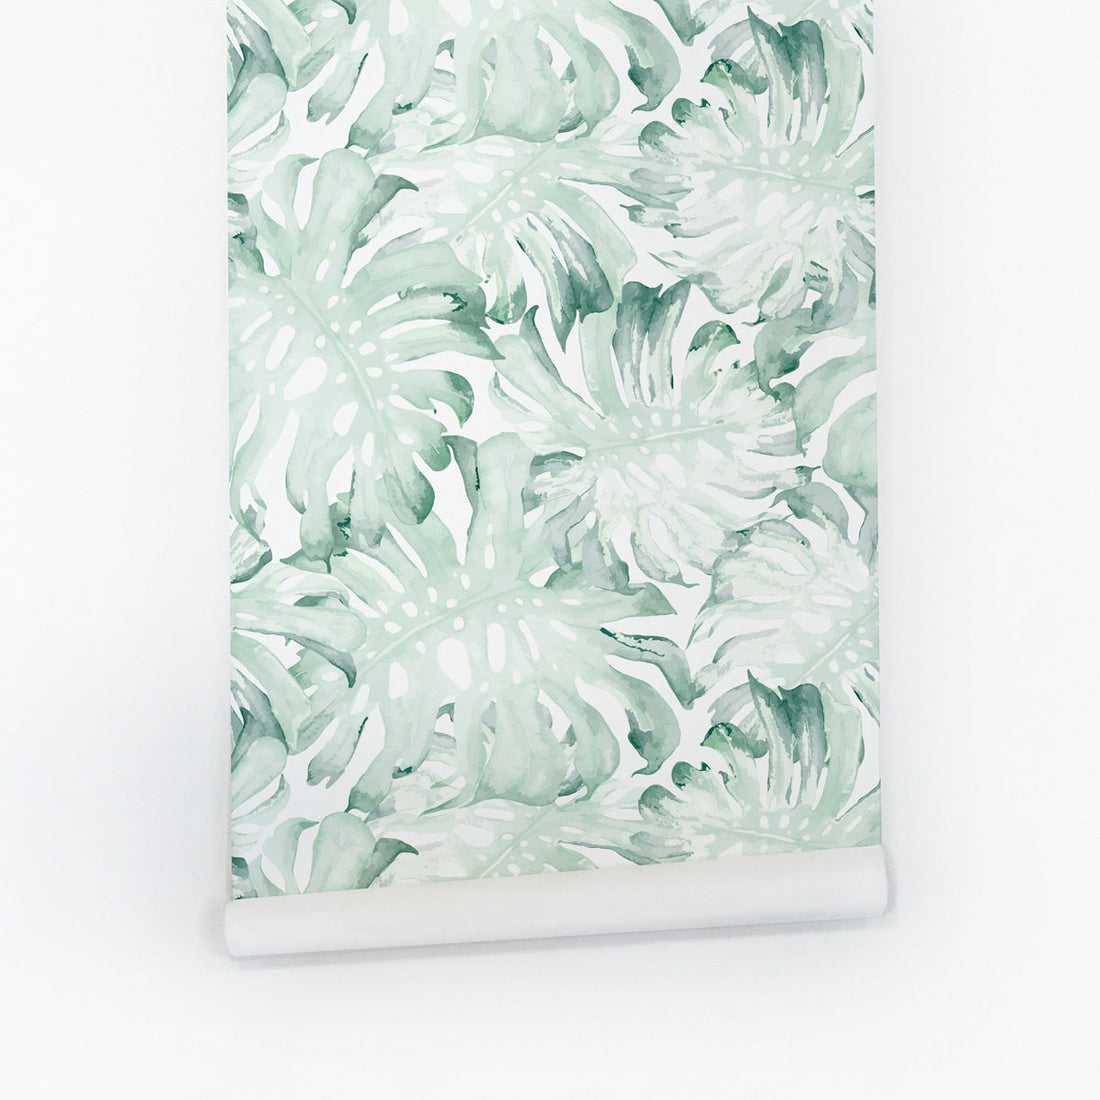 watercolor green palm leaves print removable wallpaper for baby nursery